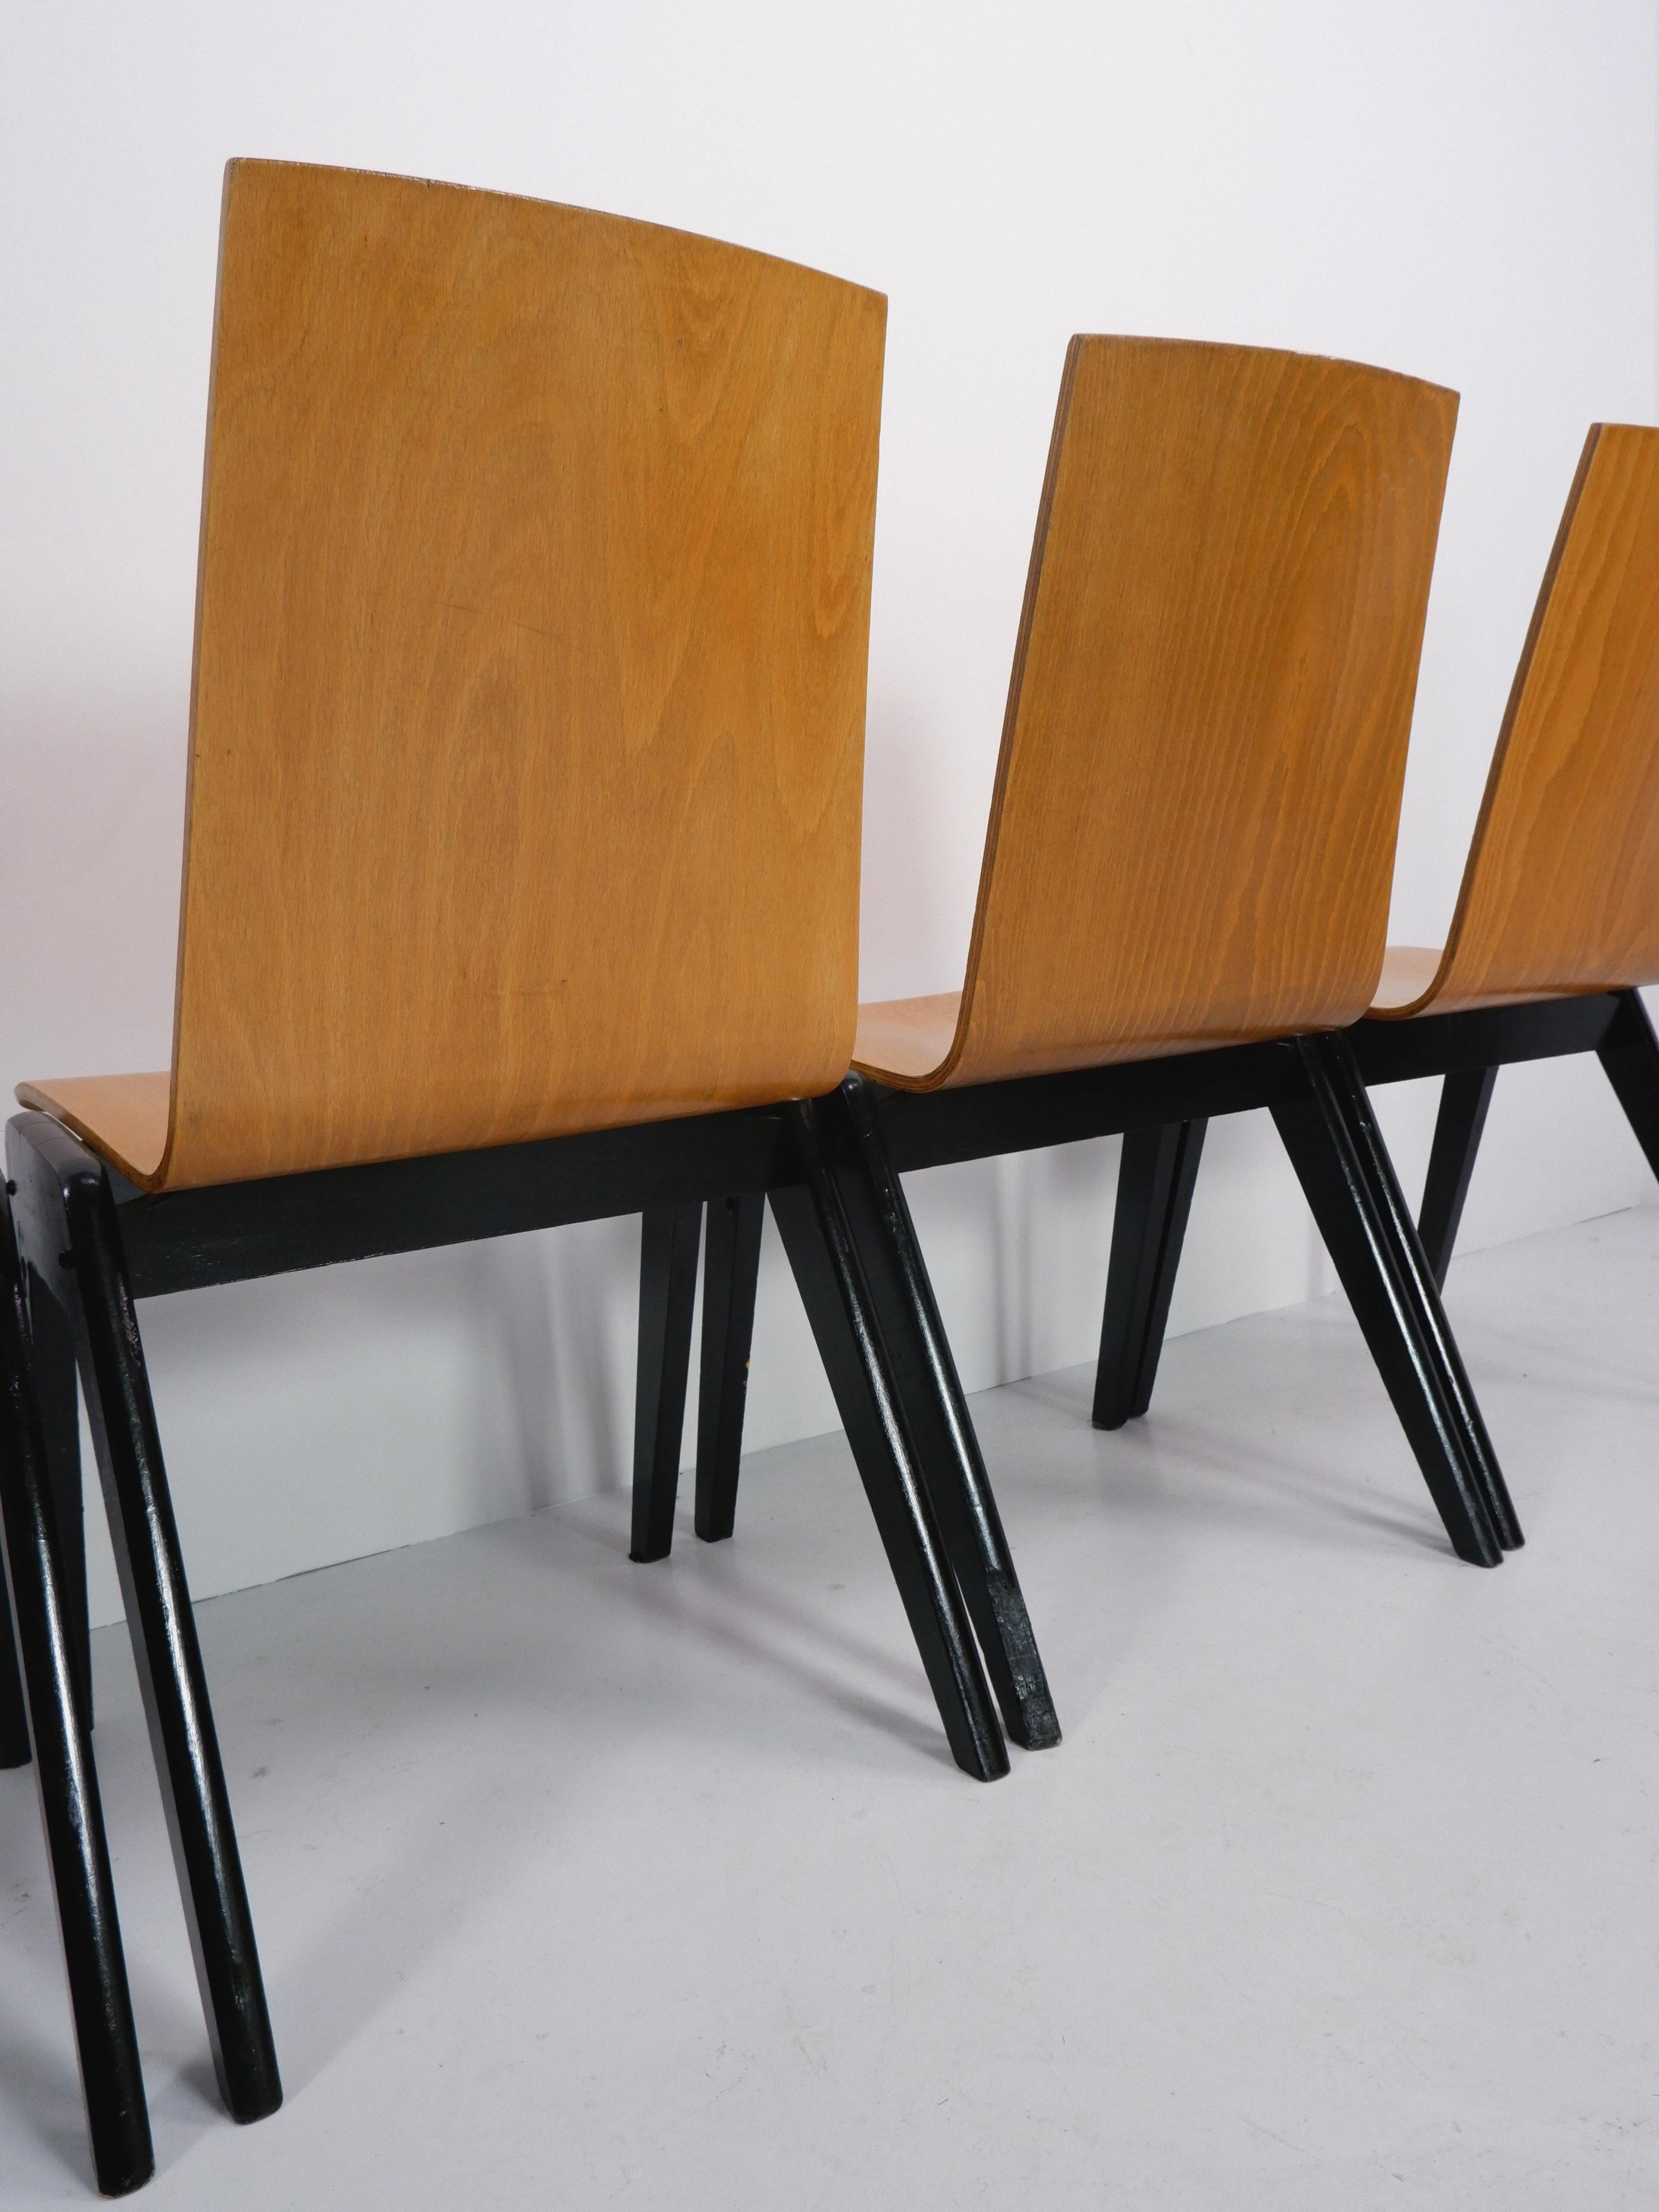 Plywood Stacking Chairs attrb. Roland Rainer, c.1950 For Sale 1